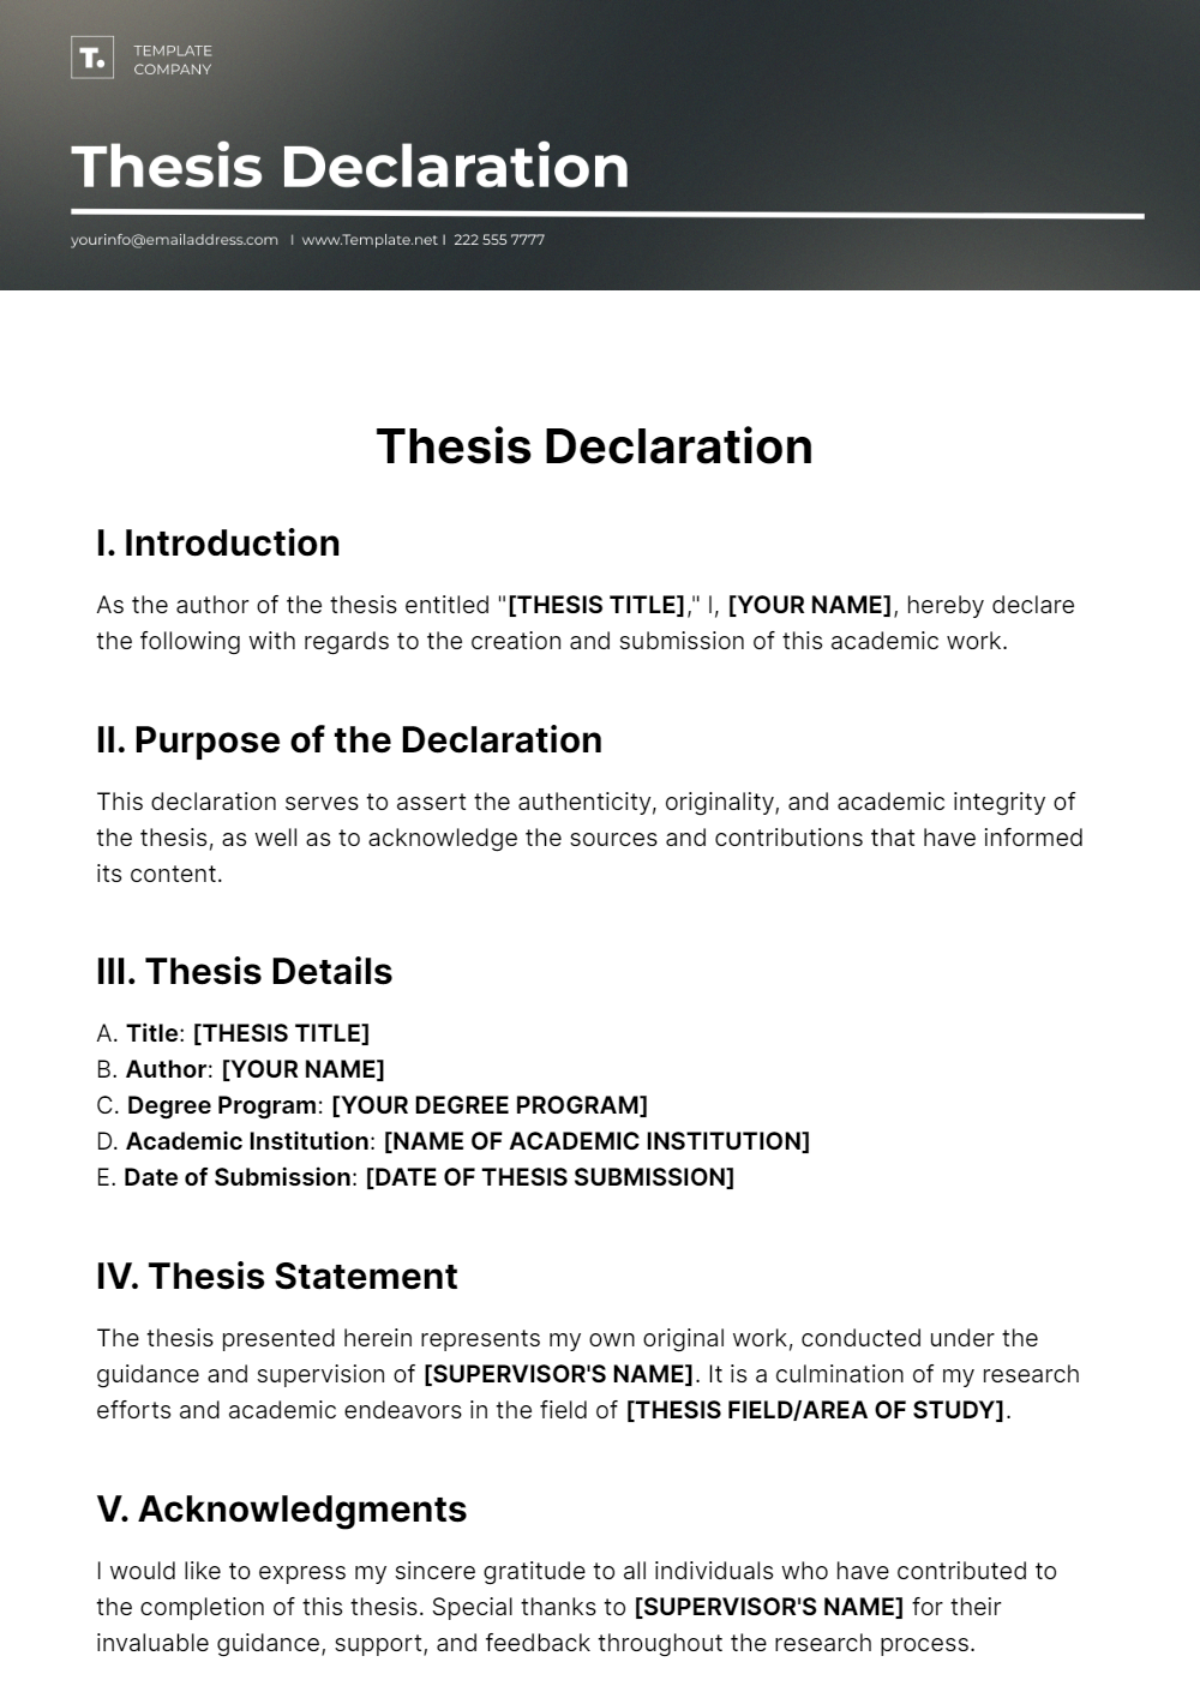 Free Thesis Declaration Template